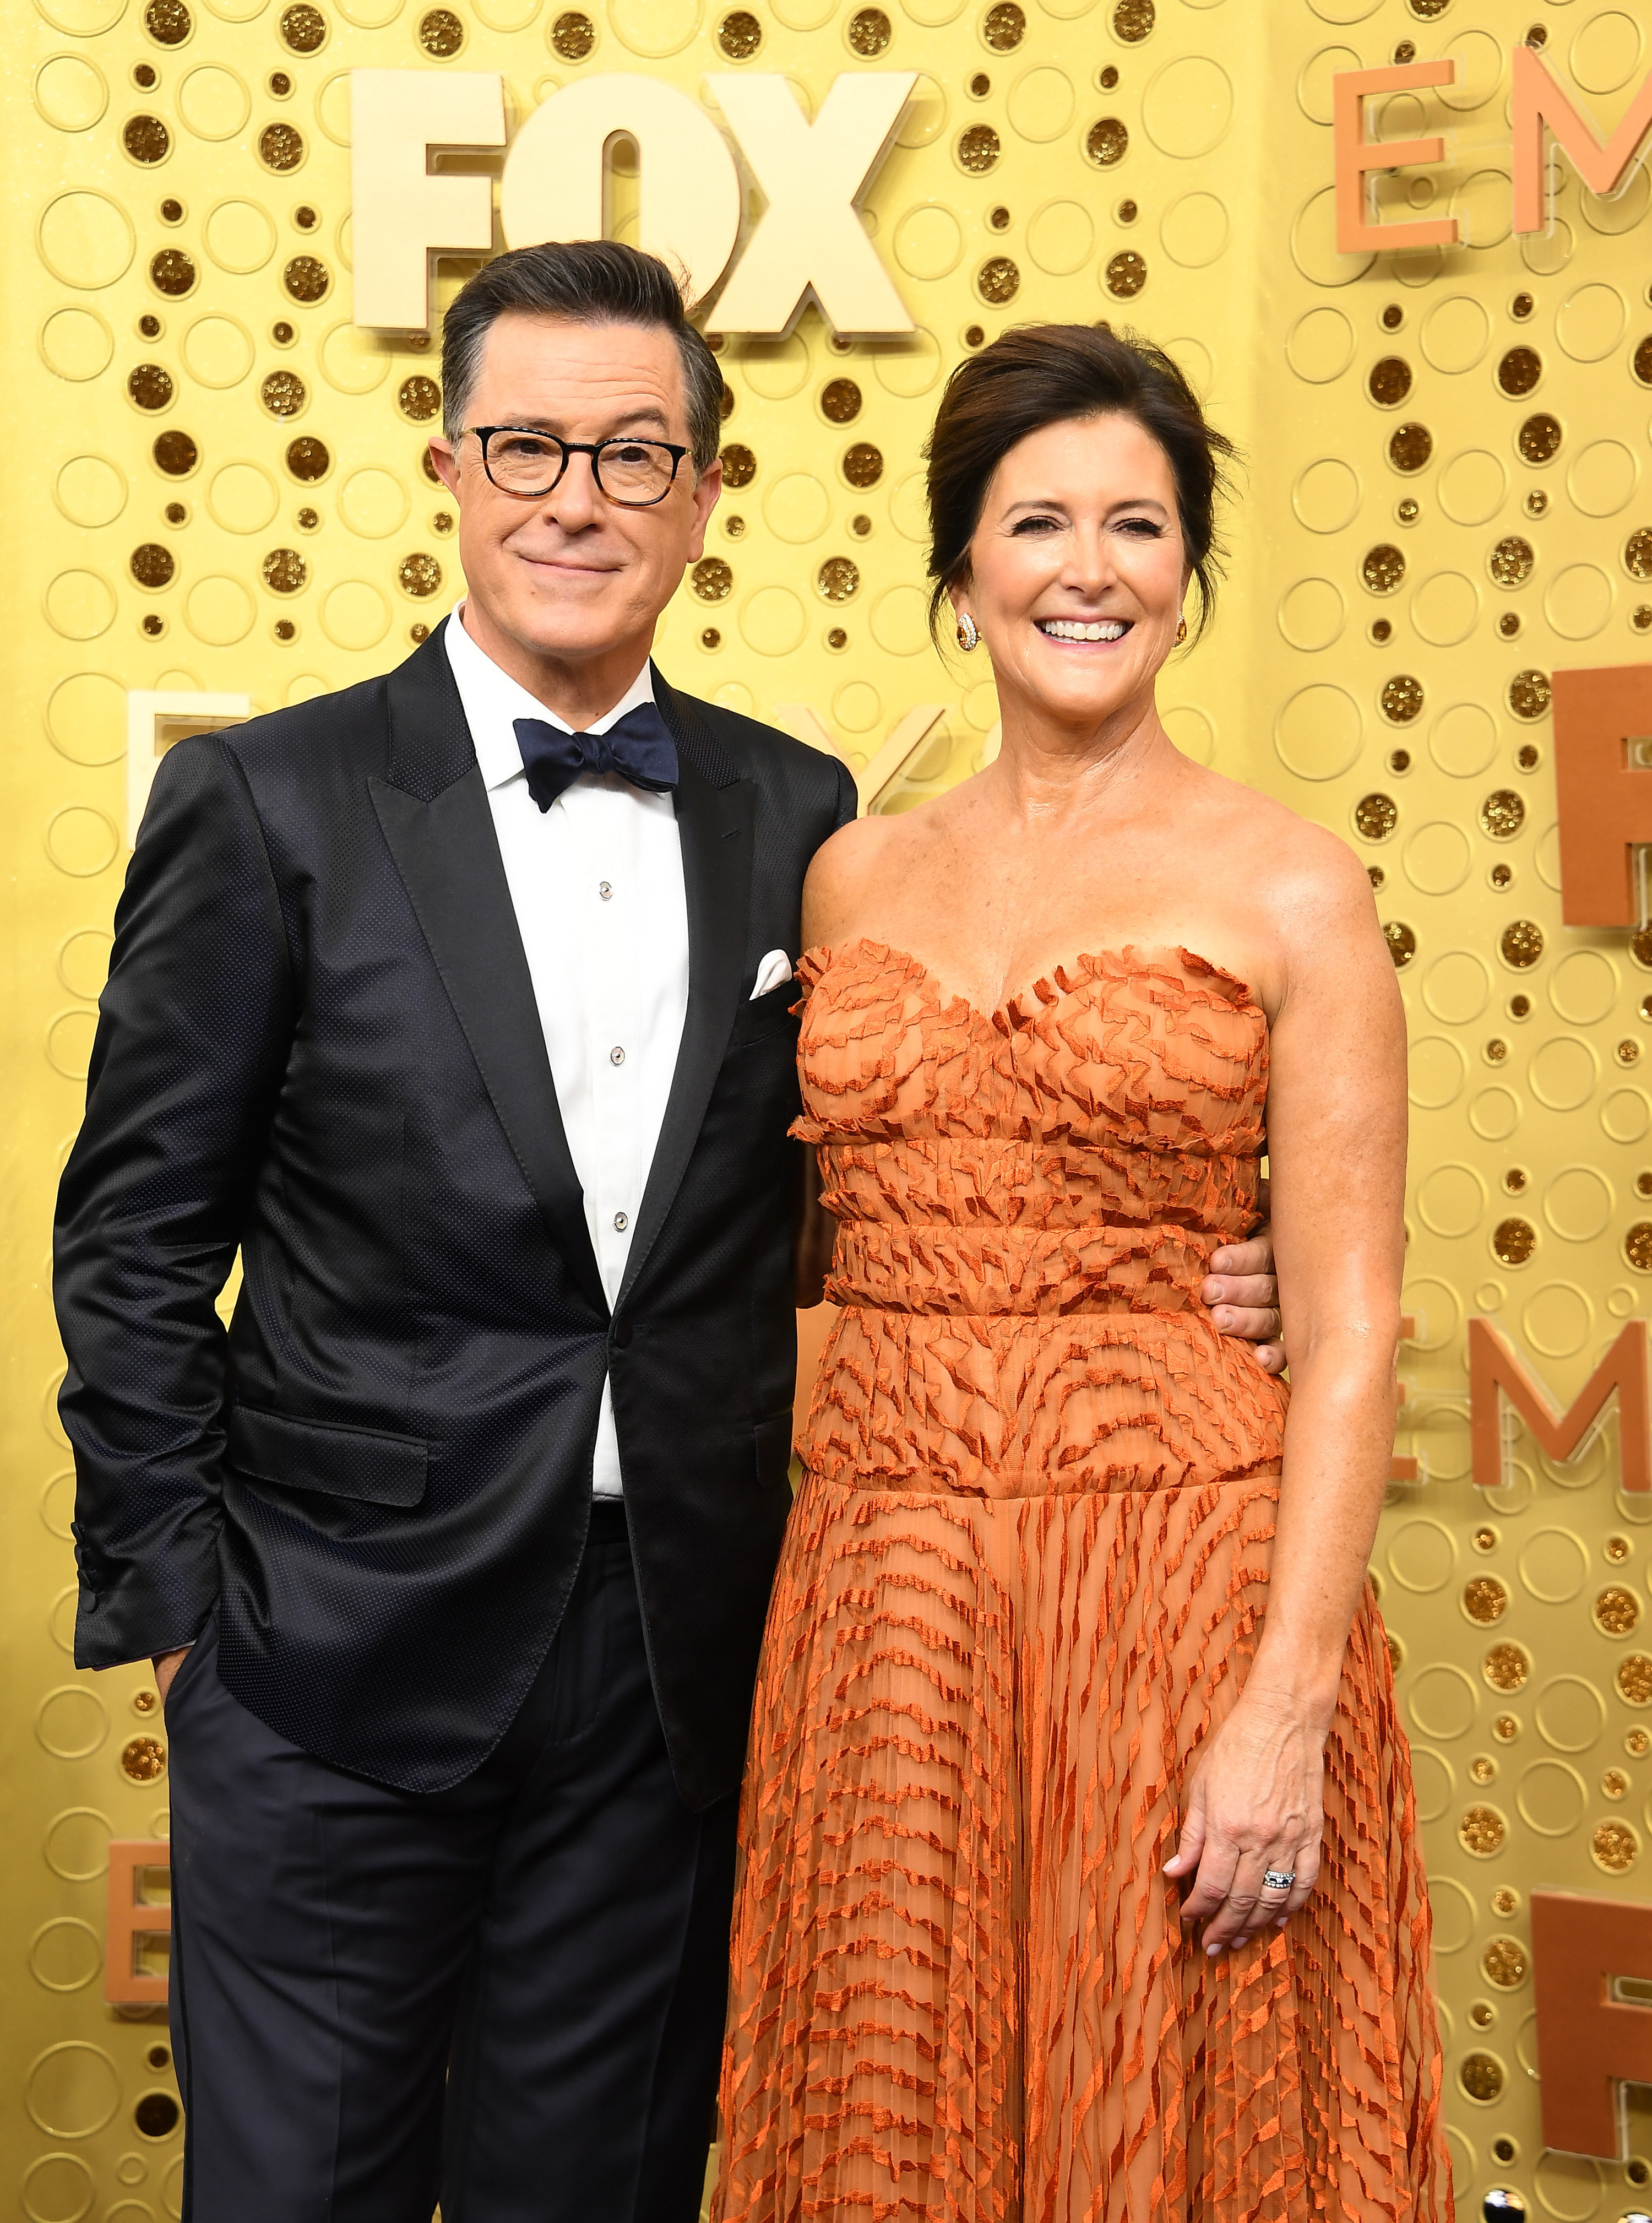 Stephen Colbert and Evelyn McGee-Colbert at the 71st Emmy Awards at Microsoft Theater in September of 2019